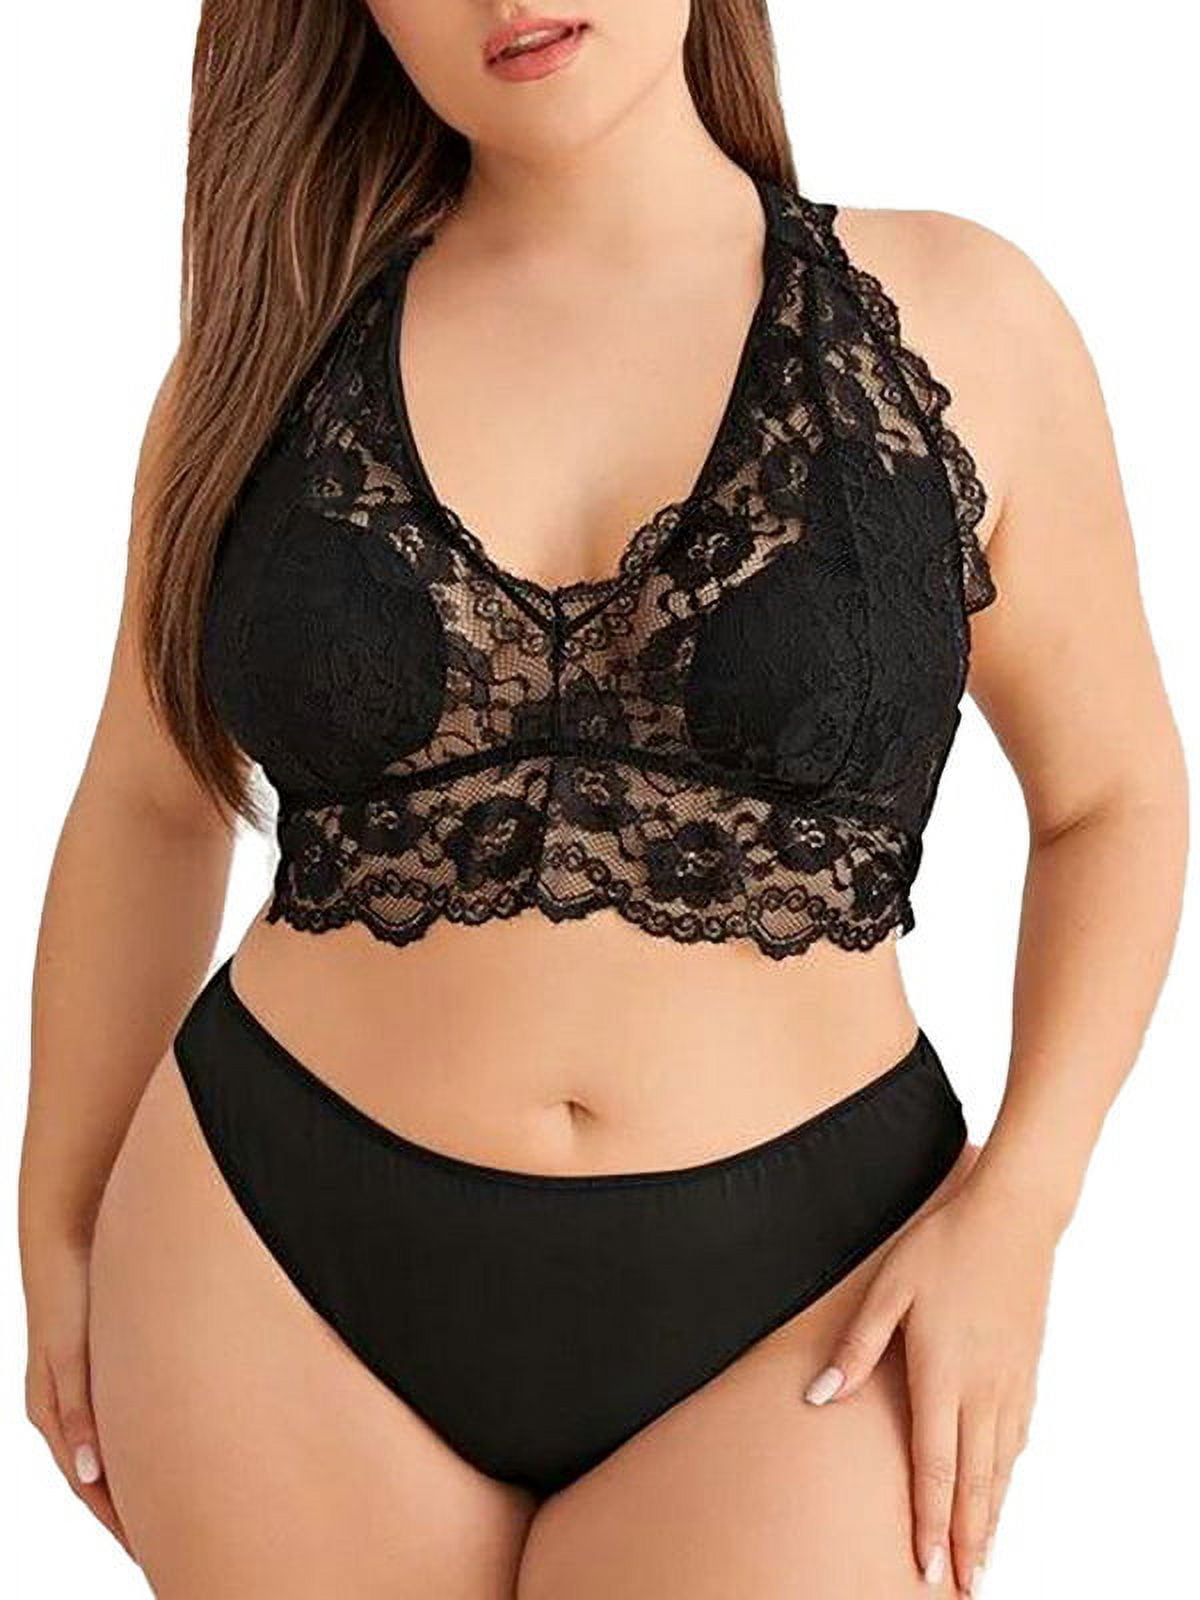 2022 Plus Size 40 90 44 Lace Bras for Women's Bralette Crop Top Underwear  Sexy Lingerie Push Up Bra - Price history & Review, AliExpress Seller -  FULSURPRIS Official Store